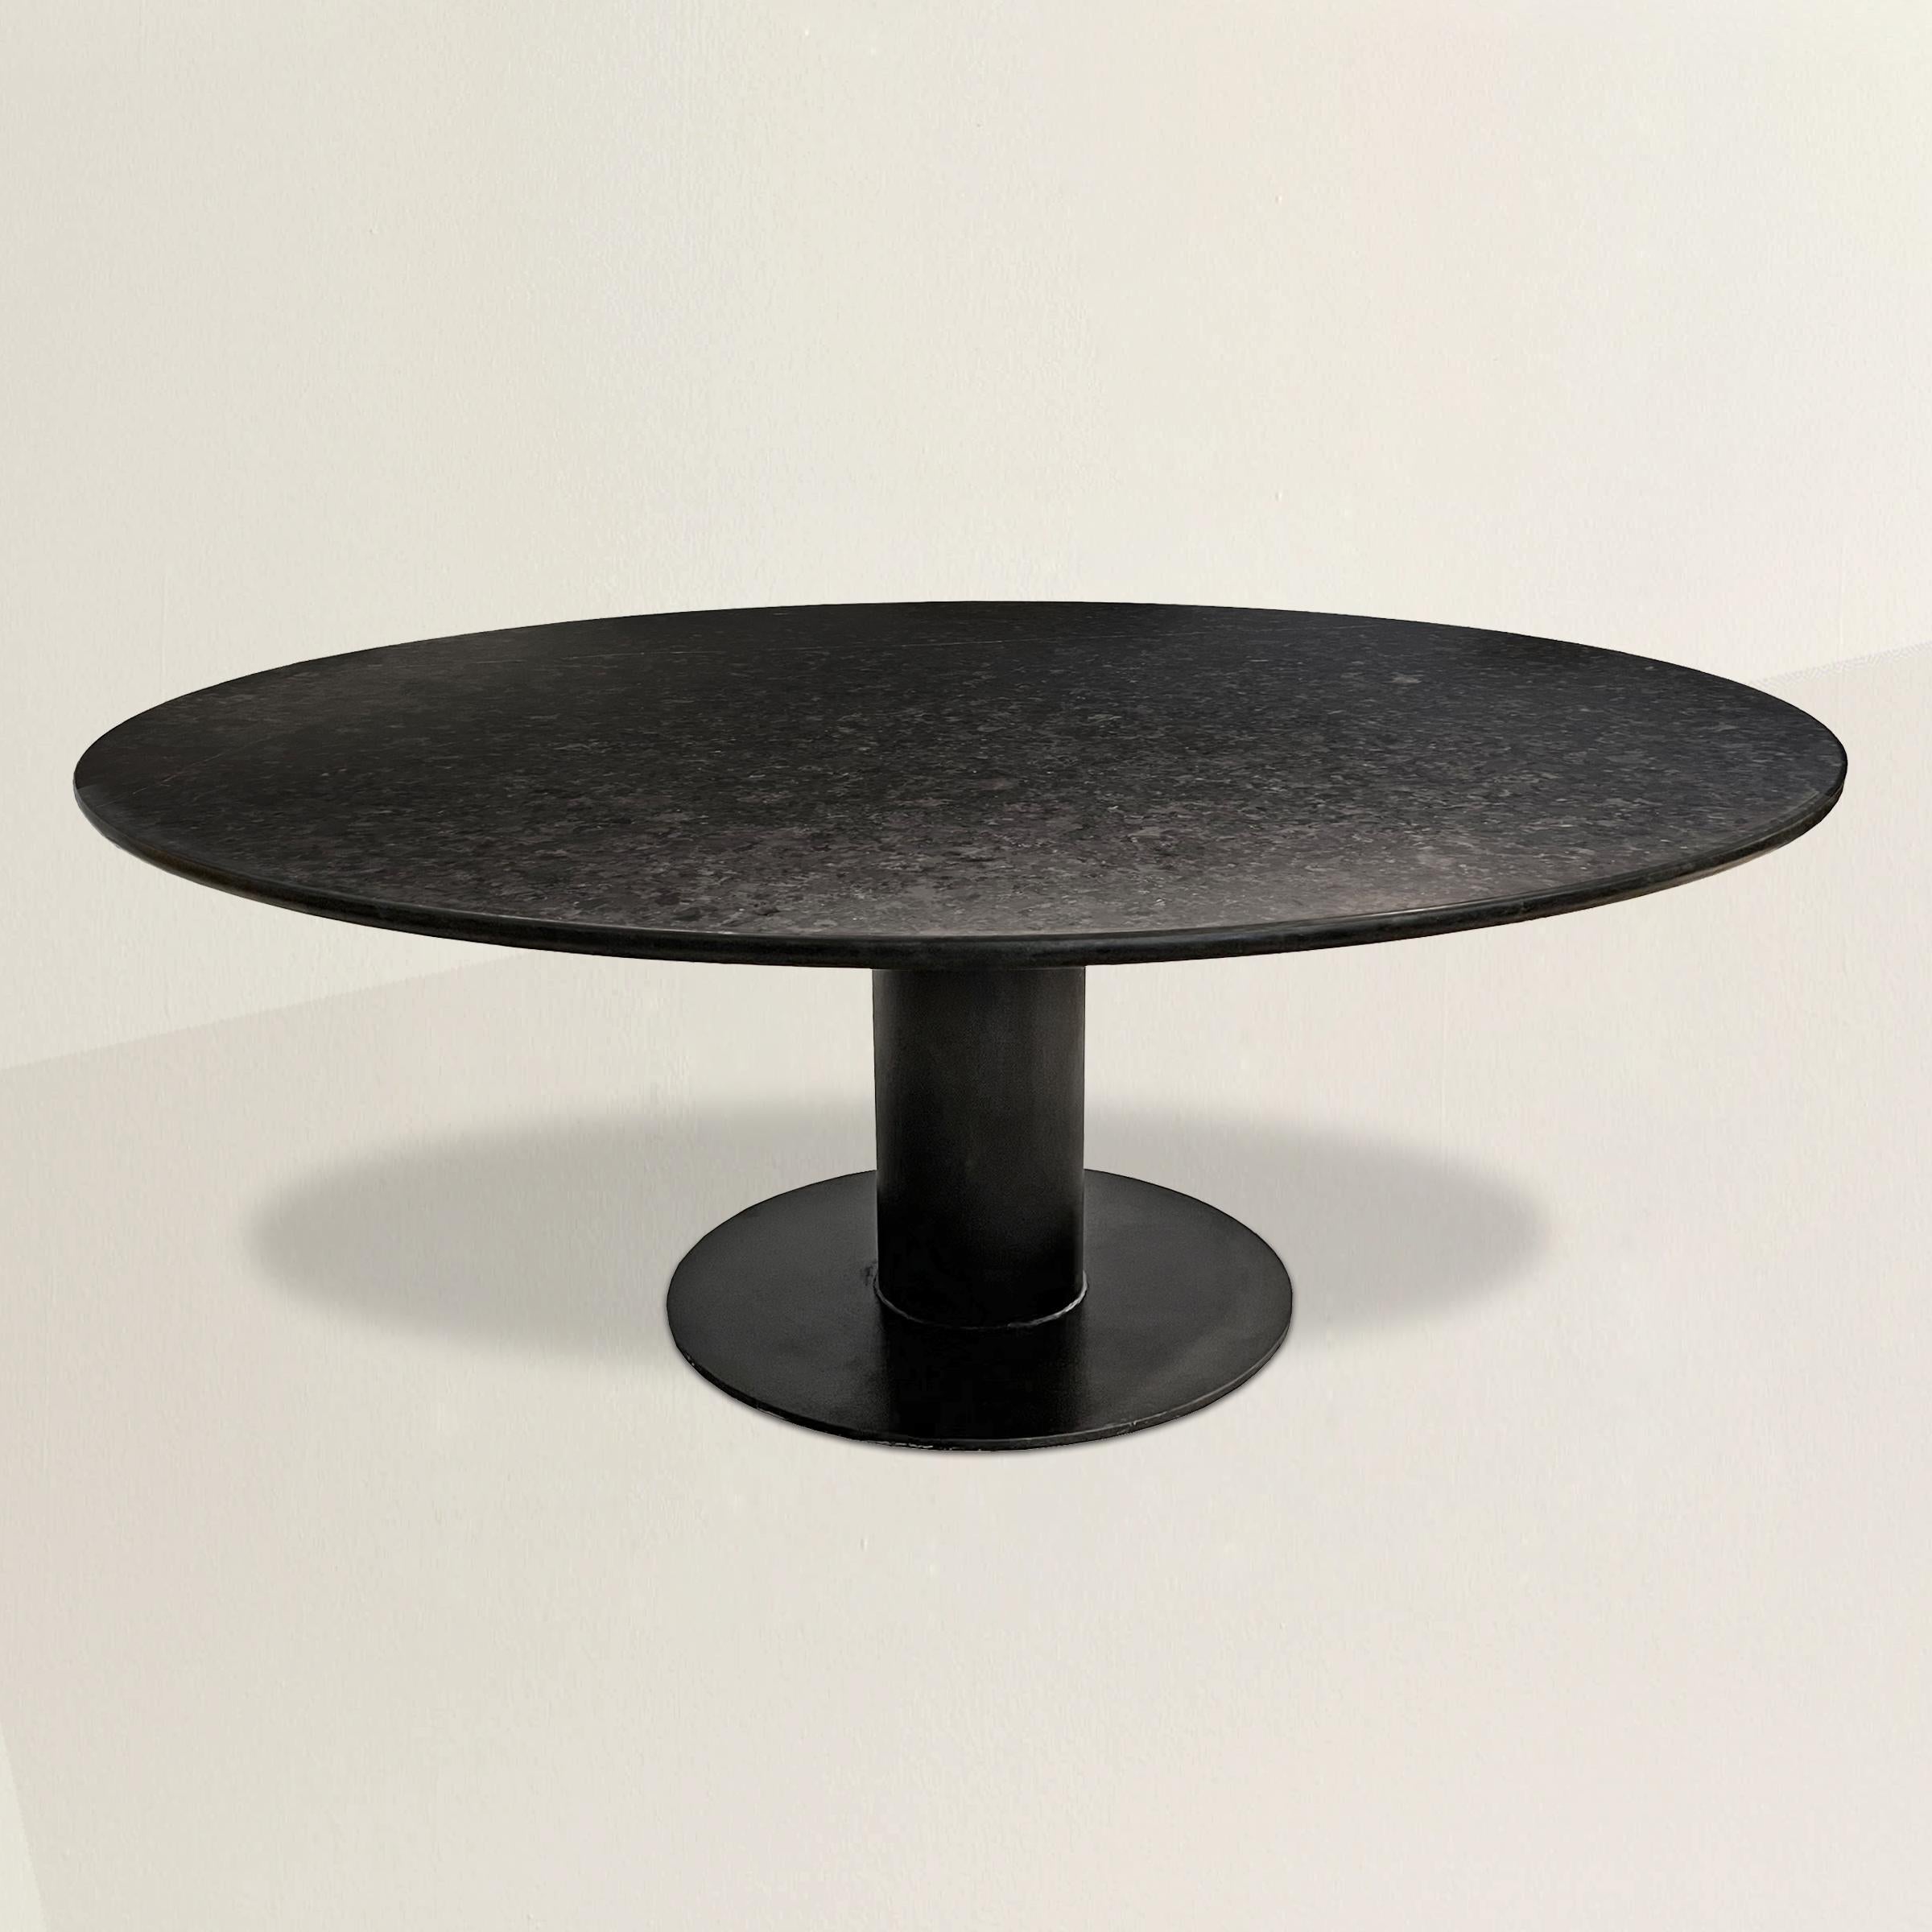 A simple and stunning 21st century round dining table with a custom 6 foot diameter honed Absolute Black granite top with a full bullnose edge detail, and mounted on a found vintage industrial steel base. Easily seats eight people, more at holidays.